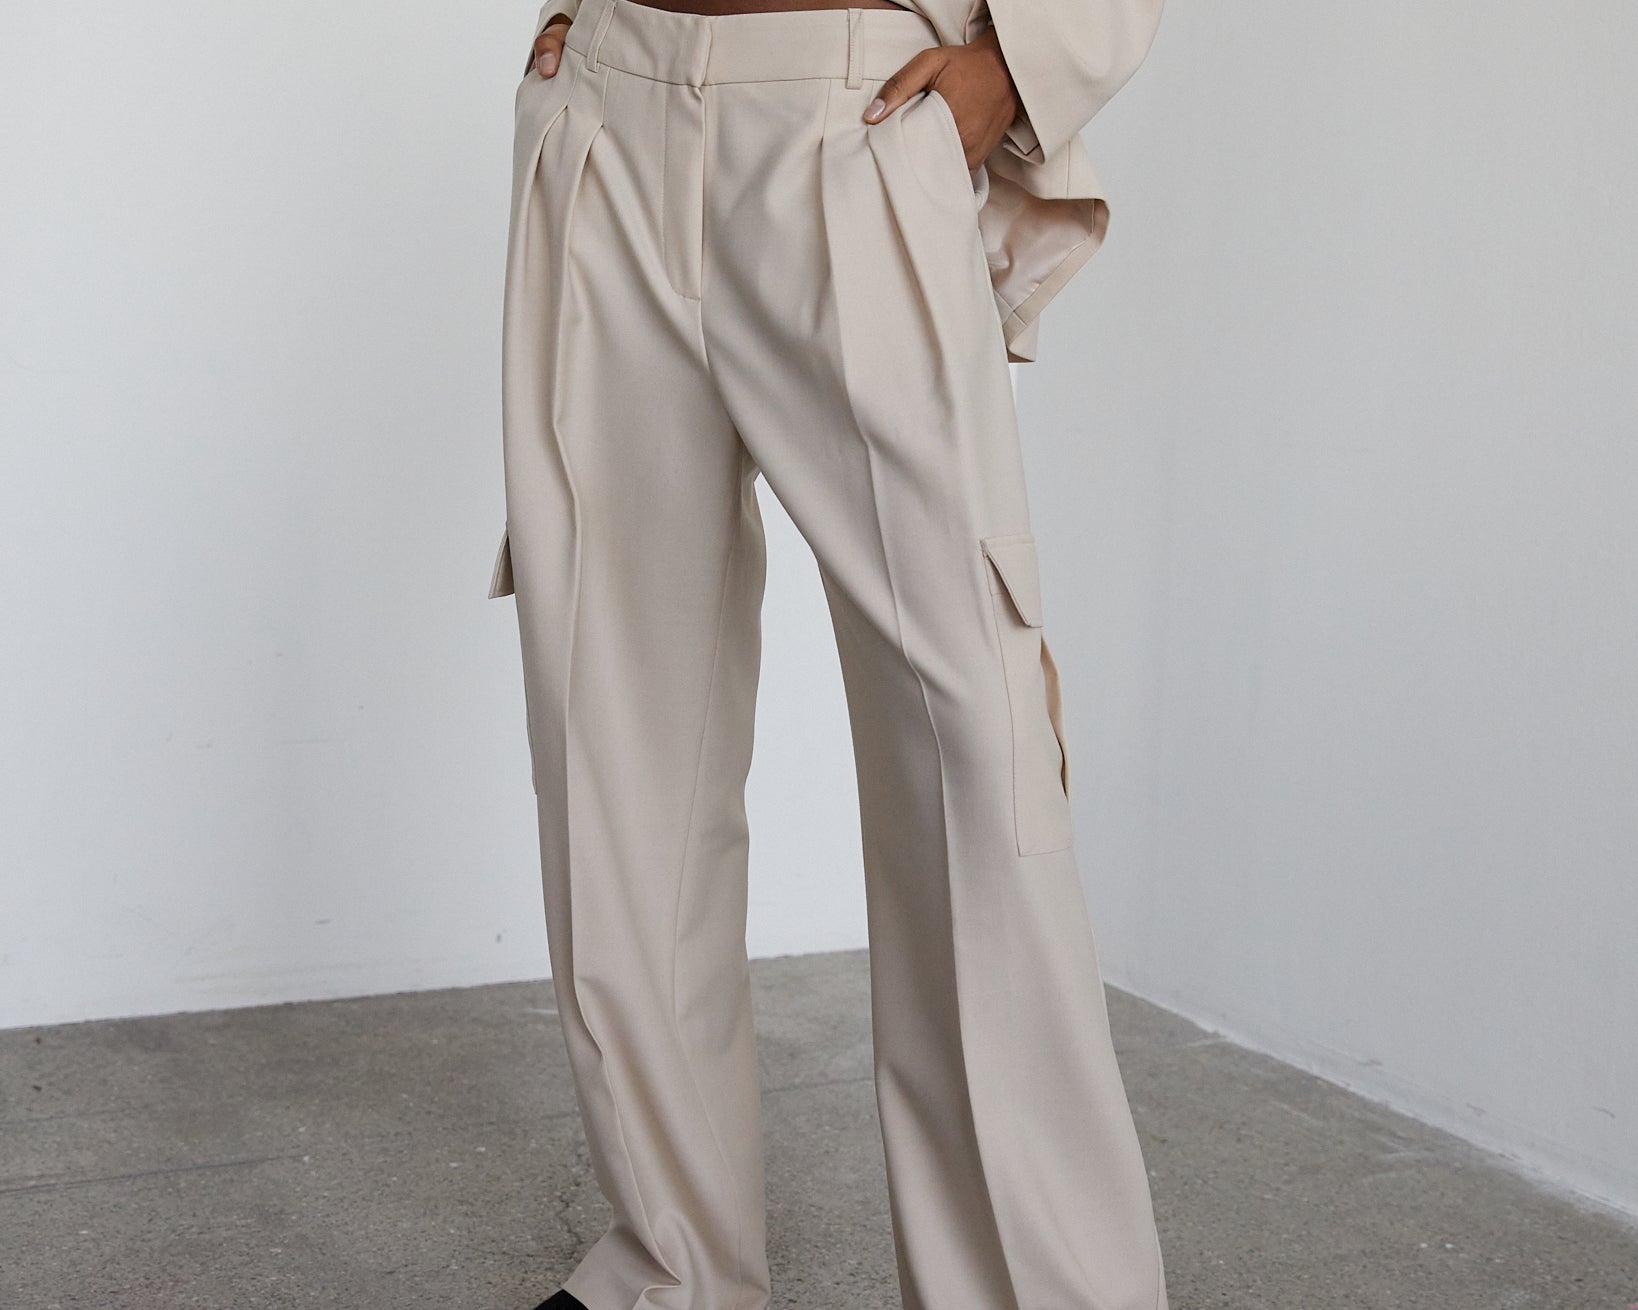 Birgitte Herskind Pleated Tomboy Style Relaxed Fit Pants Grey